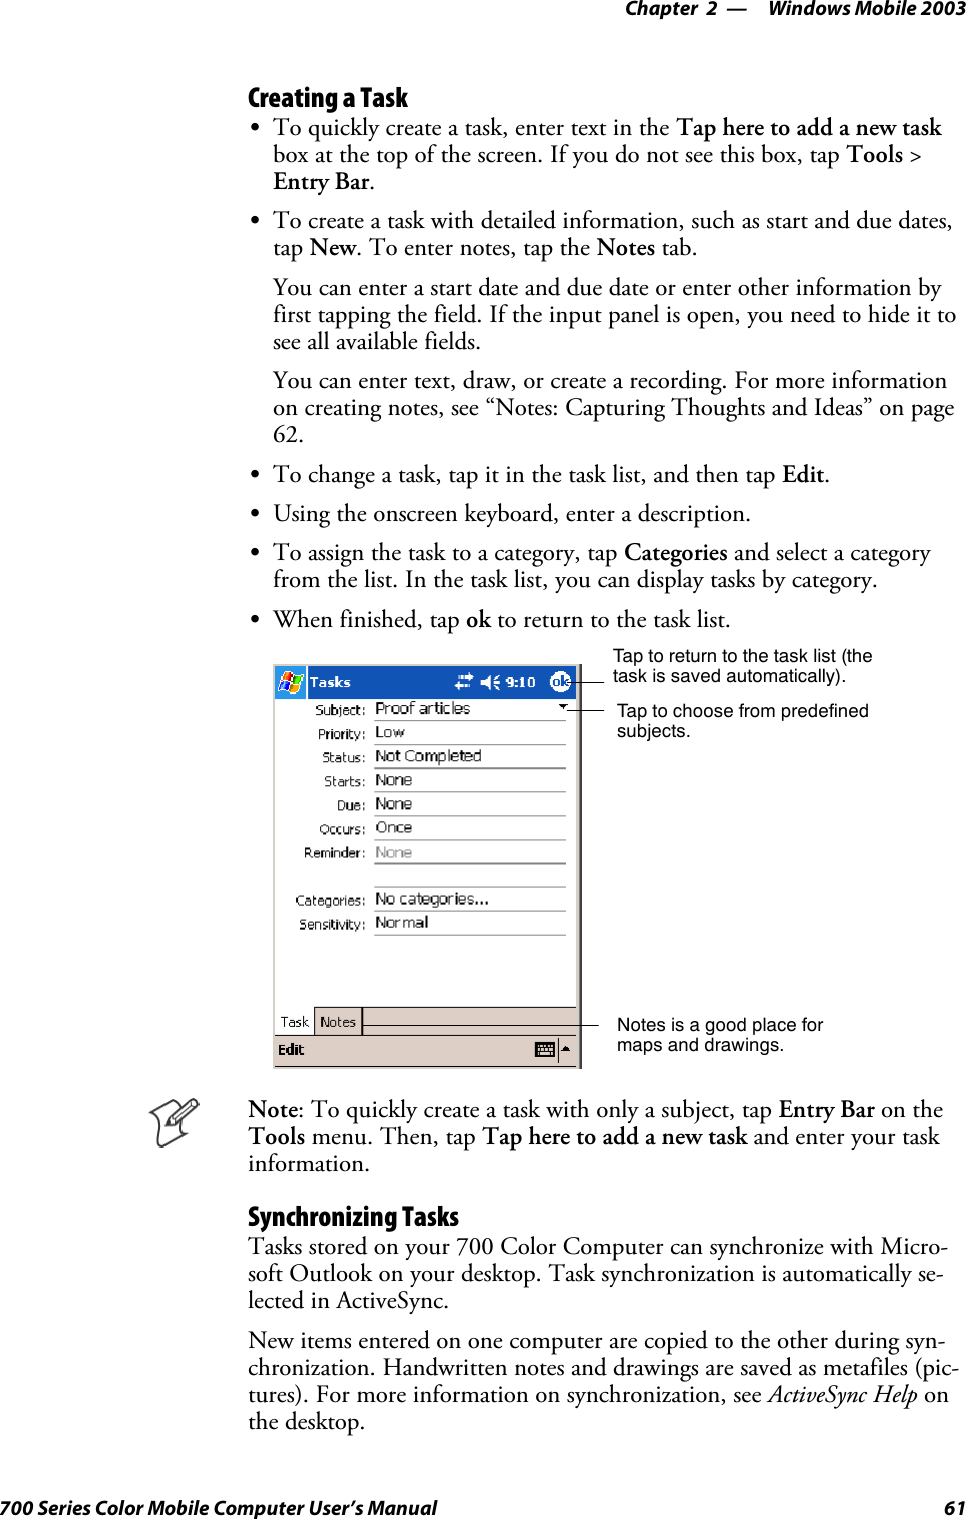 Windows Mobile 2003—Chapter 261700 Series Color Mobile Computer User’s ManualCreating a TaskSTo quickly create a task, enter text in the Tap here to add a new taskboxatthetopofthescreen.Ifyoudonotseethisbox,tapTools &gt;Entry Bar.STo create a task with detailed information, such as start and due dates,tap New. To enter notes, tap the Notes tab.You can enter a start date and due date or enter other information byfirst tapping the field. If the input panel is open, you need to hide it tosee all available fields.Youcanentertext,draw,orcreatearecording.Formoreinformationon creating notes, see “Notes: Capturing Thoughts and Ideas” on page62.STo change a task, tap it in the task list, and then tap Edit.SUsing the onscreen keyboard, enter a description.STo assign the task to a category, tap Categories and select a categoryfrom the list. In the task list, you can display tasks by category.SWhen finished, tap ok to return to the task list.Taptoreturntothetasklist(thetask is saved automatically).Tap to choose from predefinedsubjects.Notes is a good place formaps and drawings.Note: To quickly create a task with only a subject, tap Entry Bar on theTools menu. Then, tap Tap here to add a new task and enter your taskinformation.Synchronizing TasksTasks stored on your 700 Color Computer can synchronize with Micro-soft Outlook on your desktop. Task synchronization is automatically se-lected in ActiveSync.New items entered on one computer are copied to the other during syn-chronization. Handwritten notes and drawings are saved as metafiles (pic-tures). For more information on synchronization, see ActiveSync Help onthe desktop.